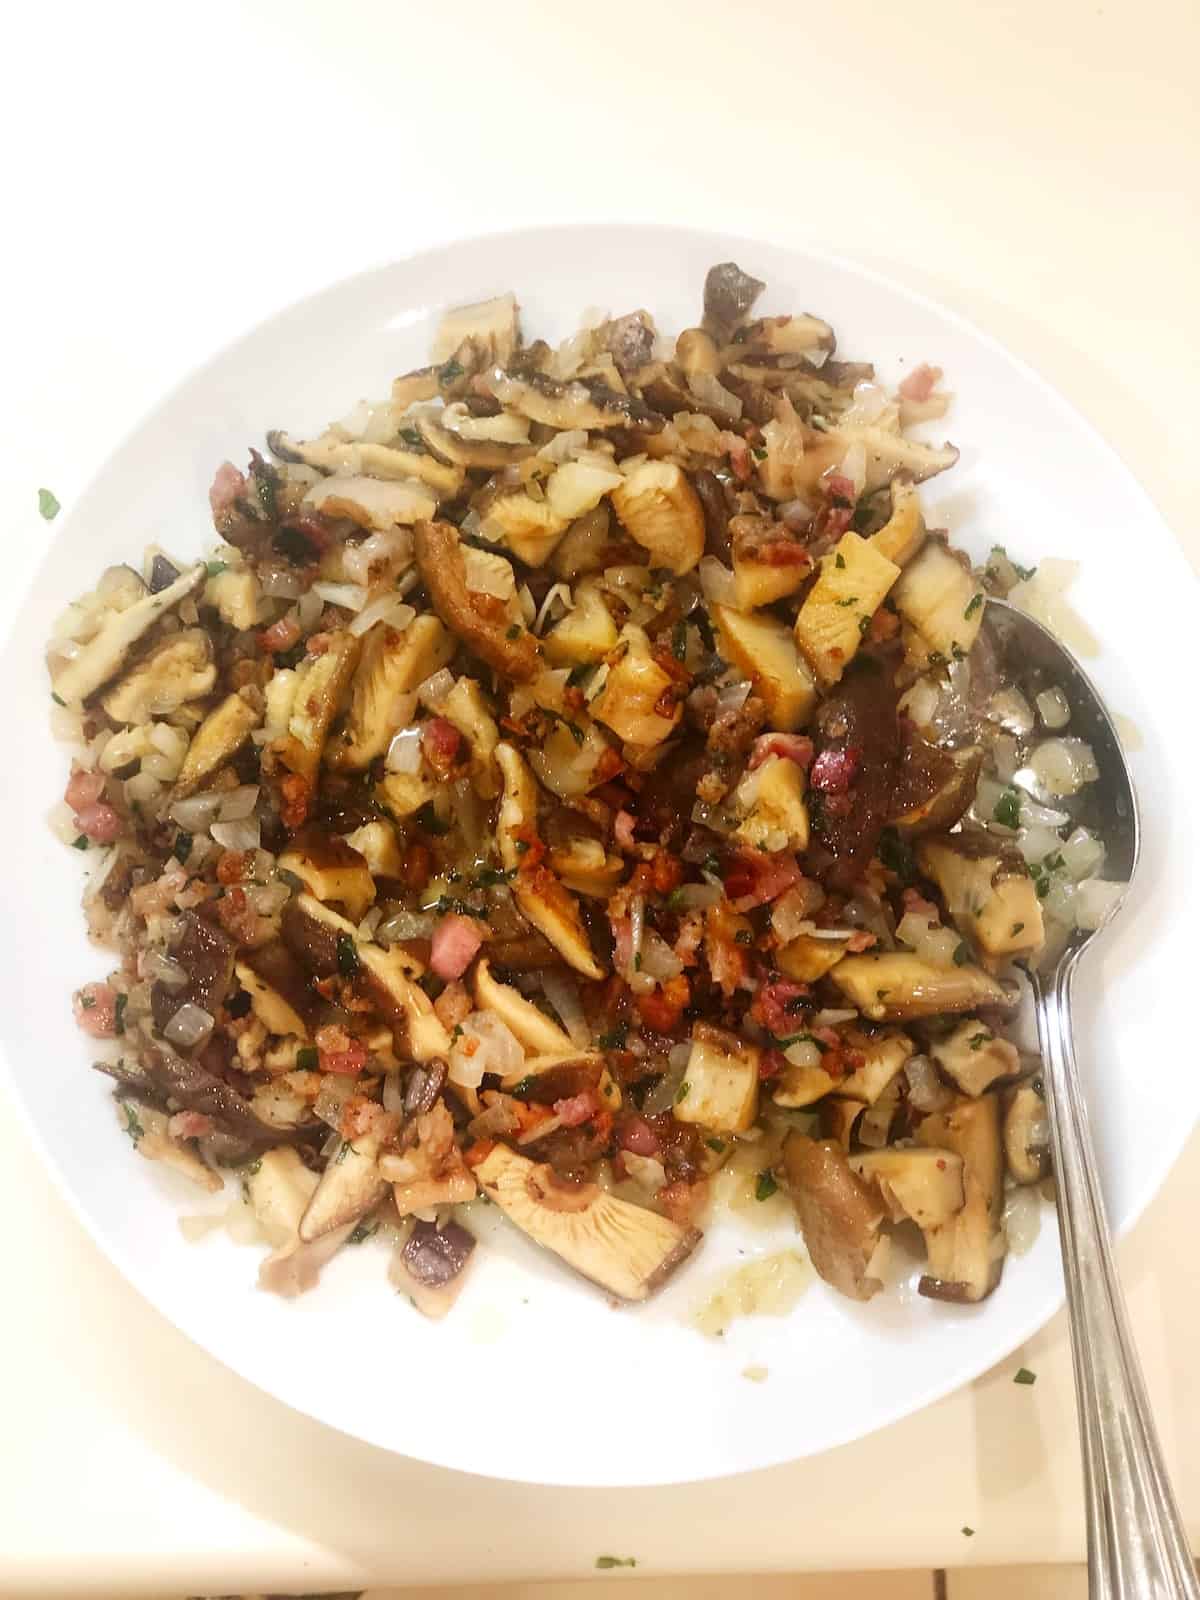 Cooked pancetta and mushrooms on a plate